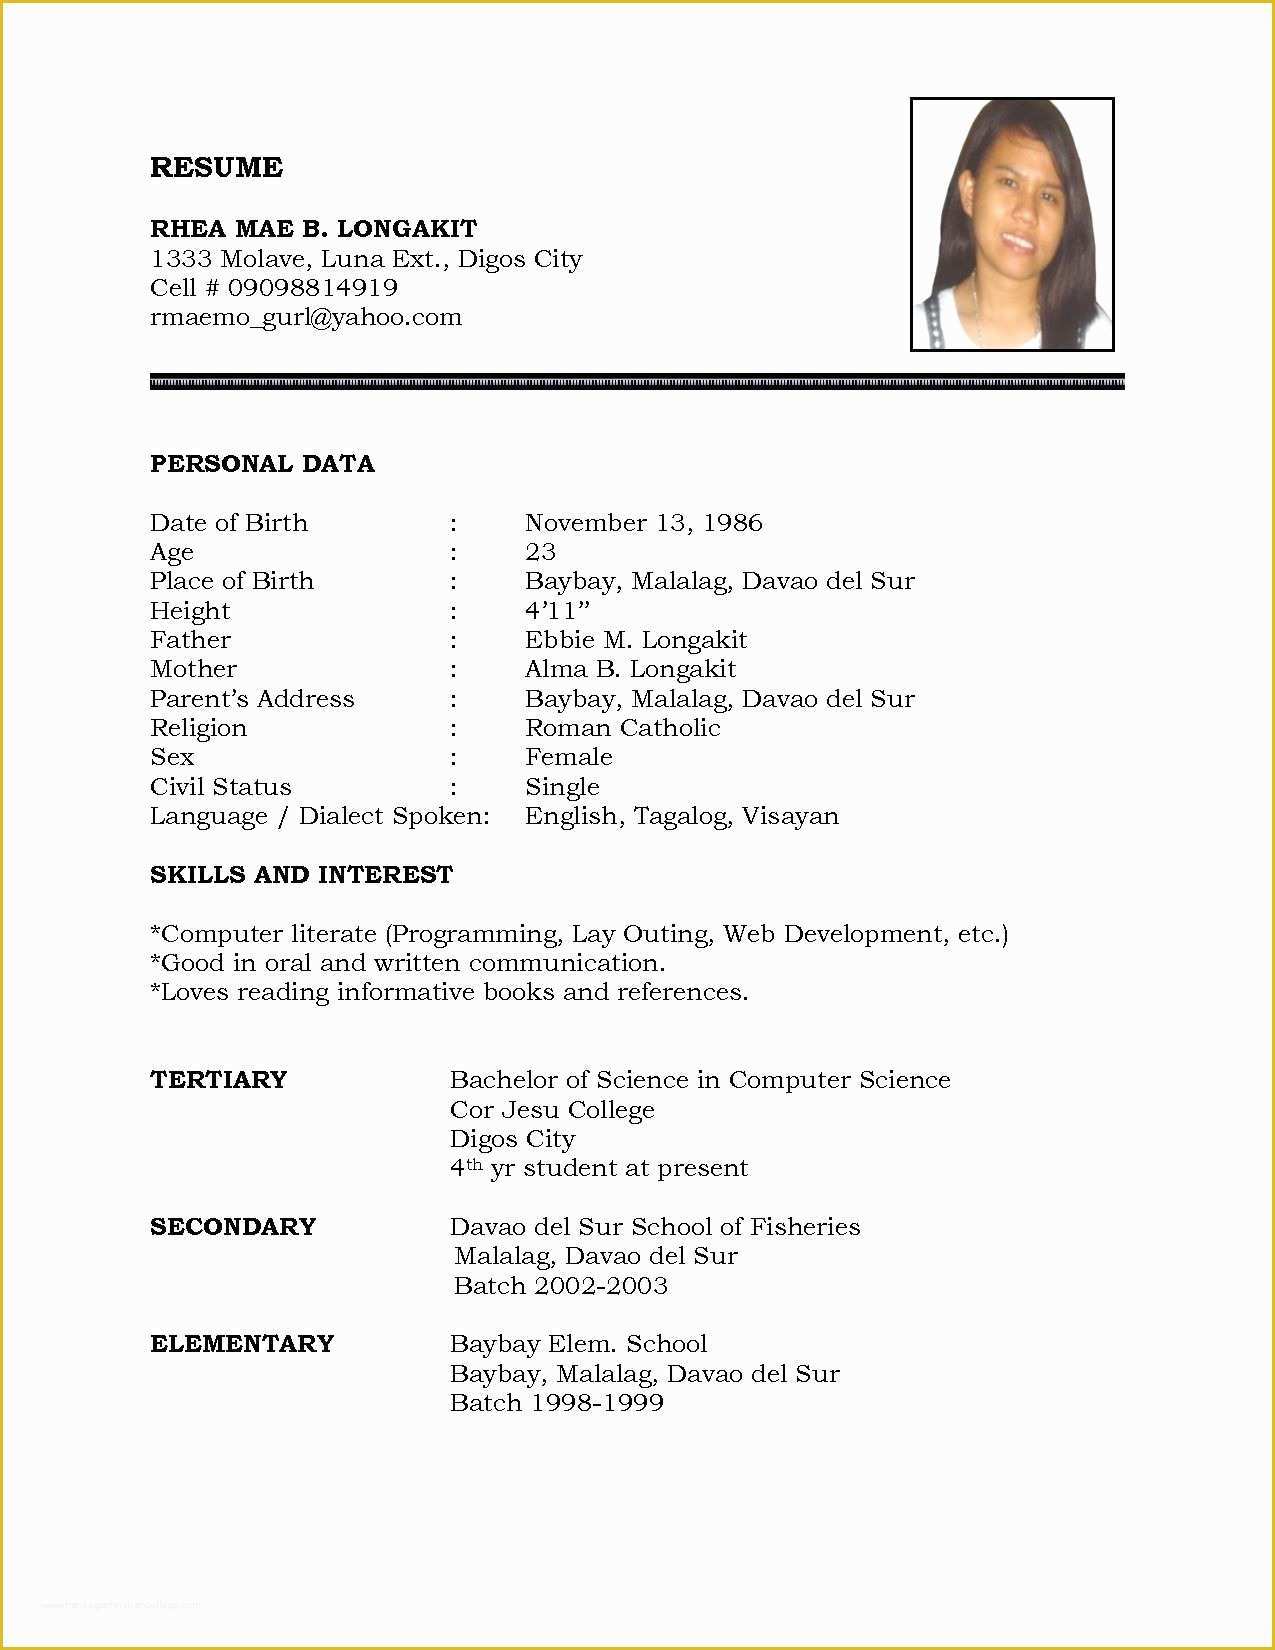 easy-resume-template-free-of-resume-sample-simple-de9e2a60f-the-simple